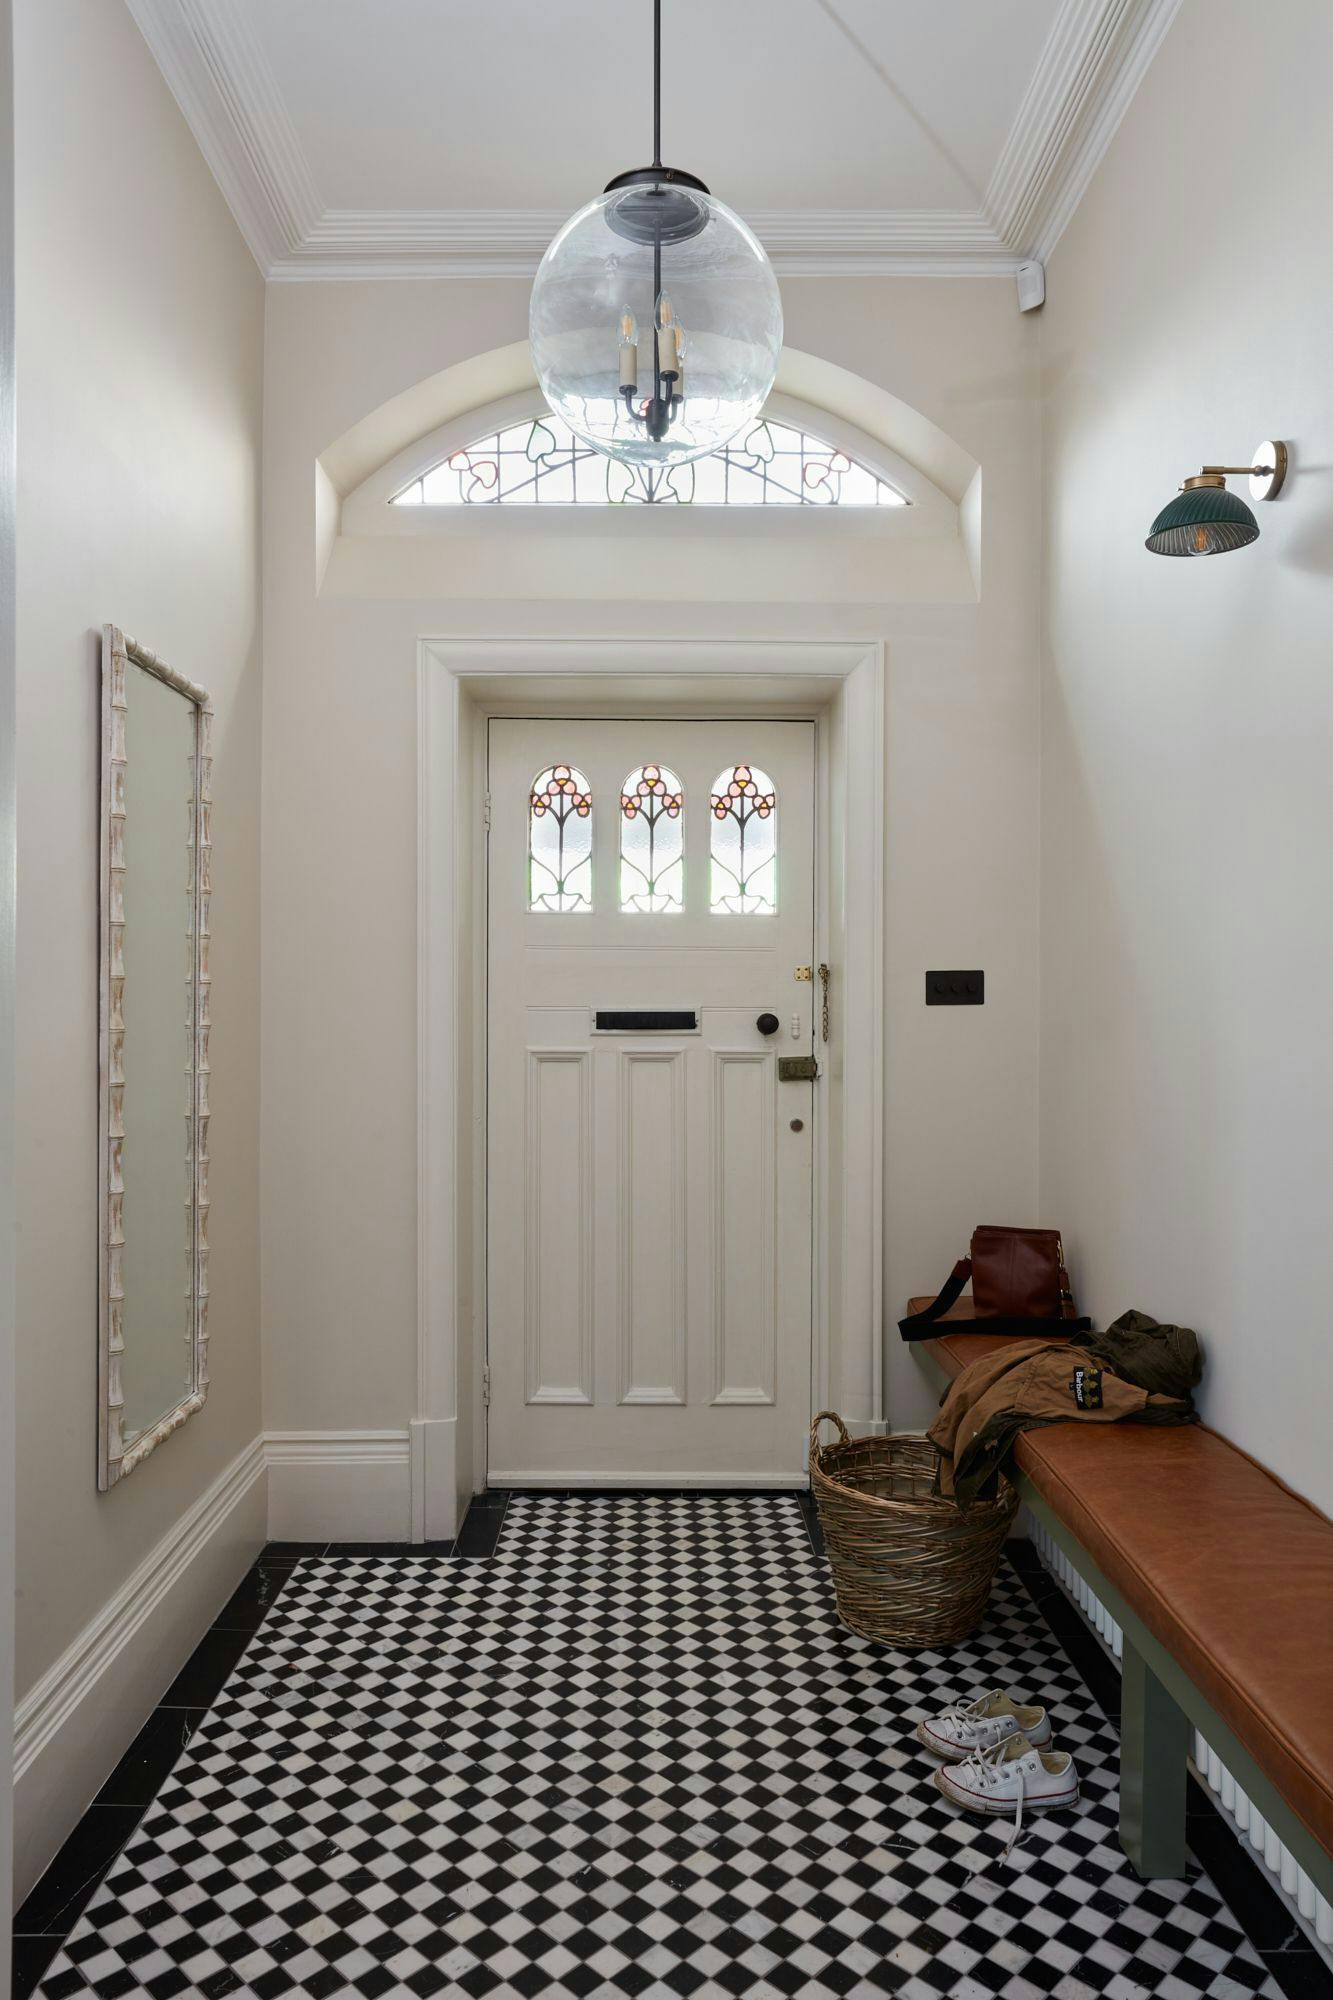 This beautiful Edwardian detached house was fully renovated and refurbished to create a stunning home.